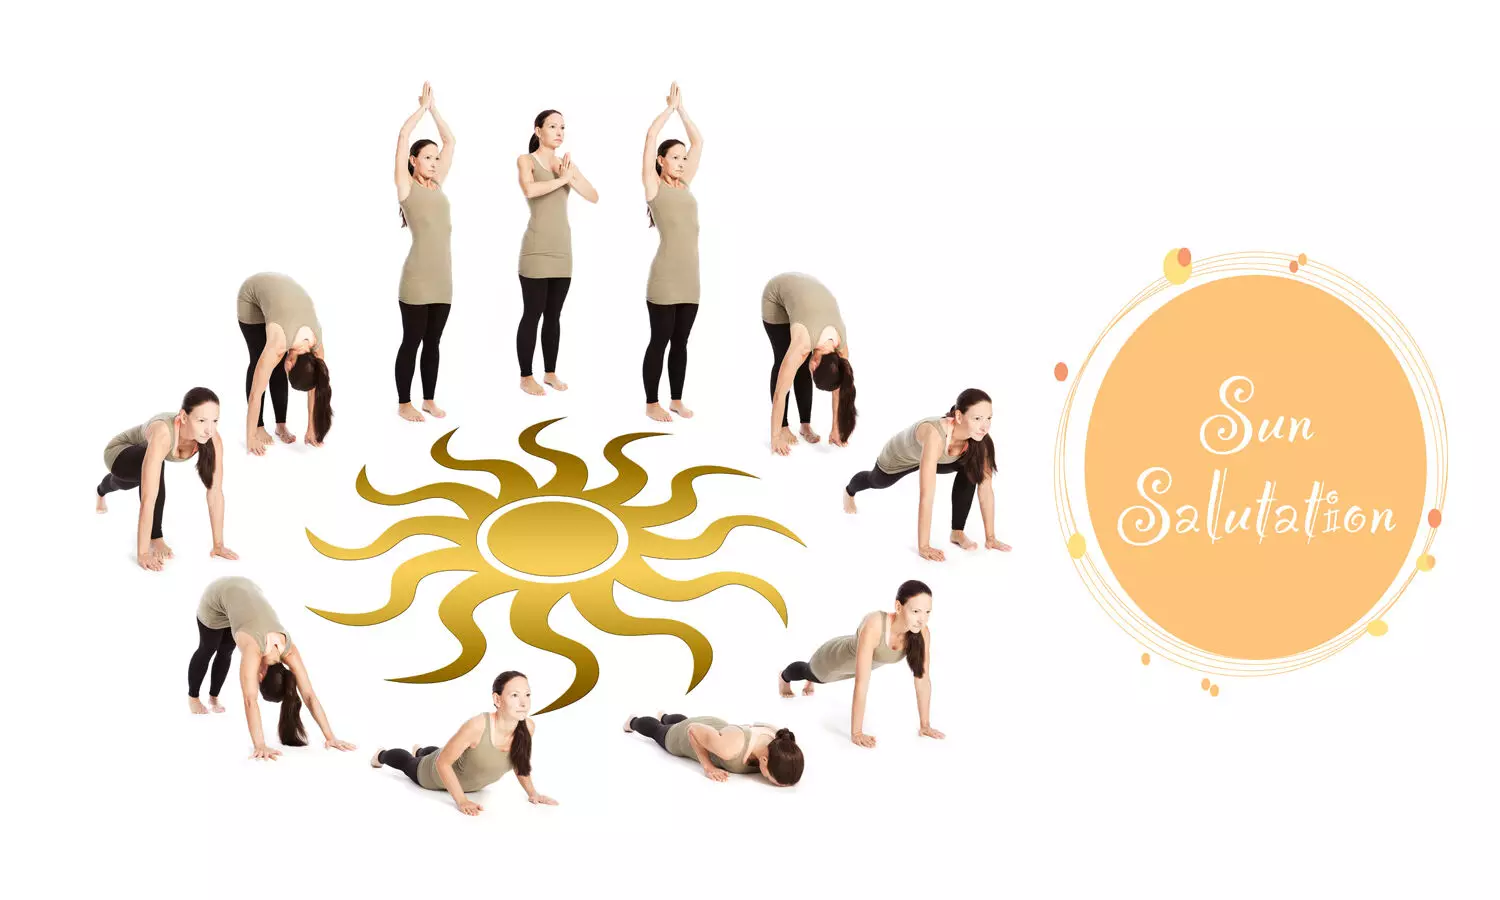 Surya Namaskar - All you need to know about the Sun Salutation Pose |  Wellness Tourism Facilitator Consultancy Services by Dr Prem